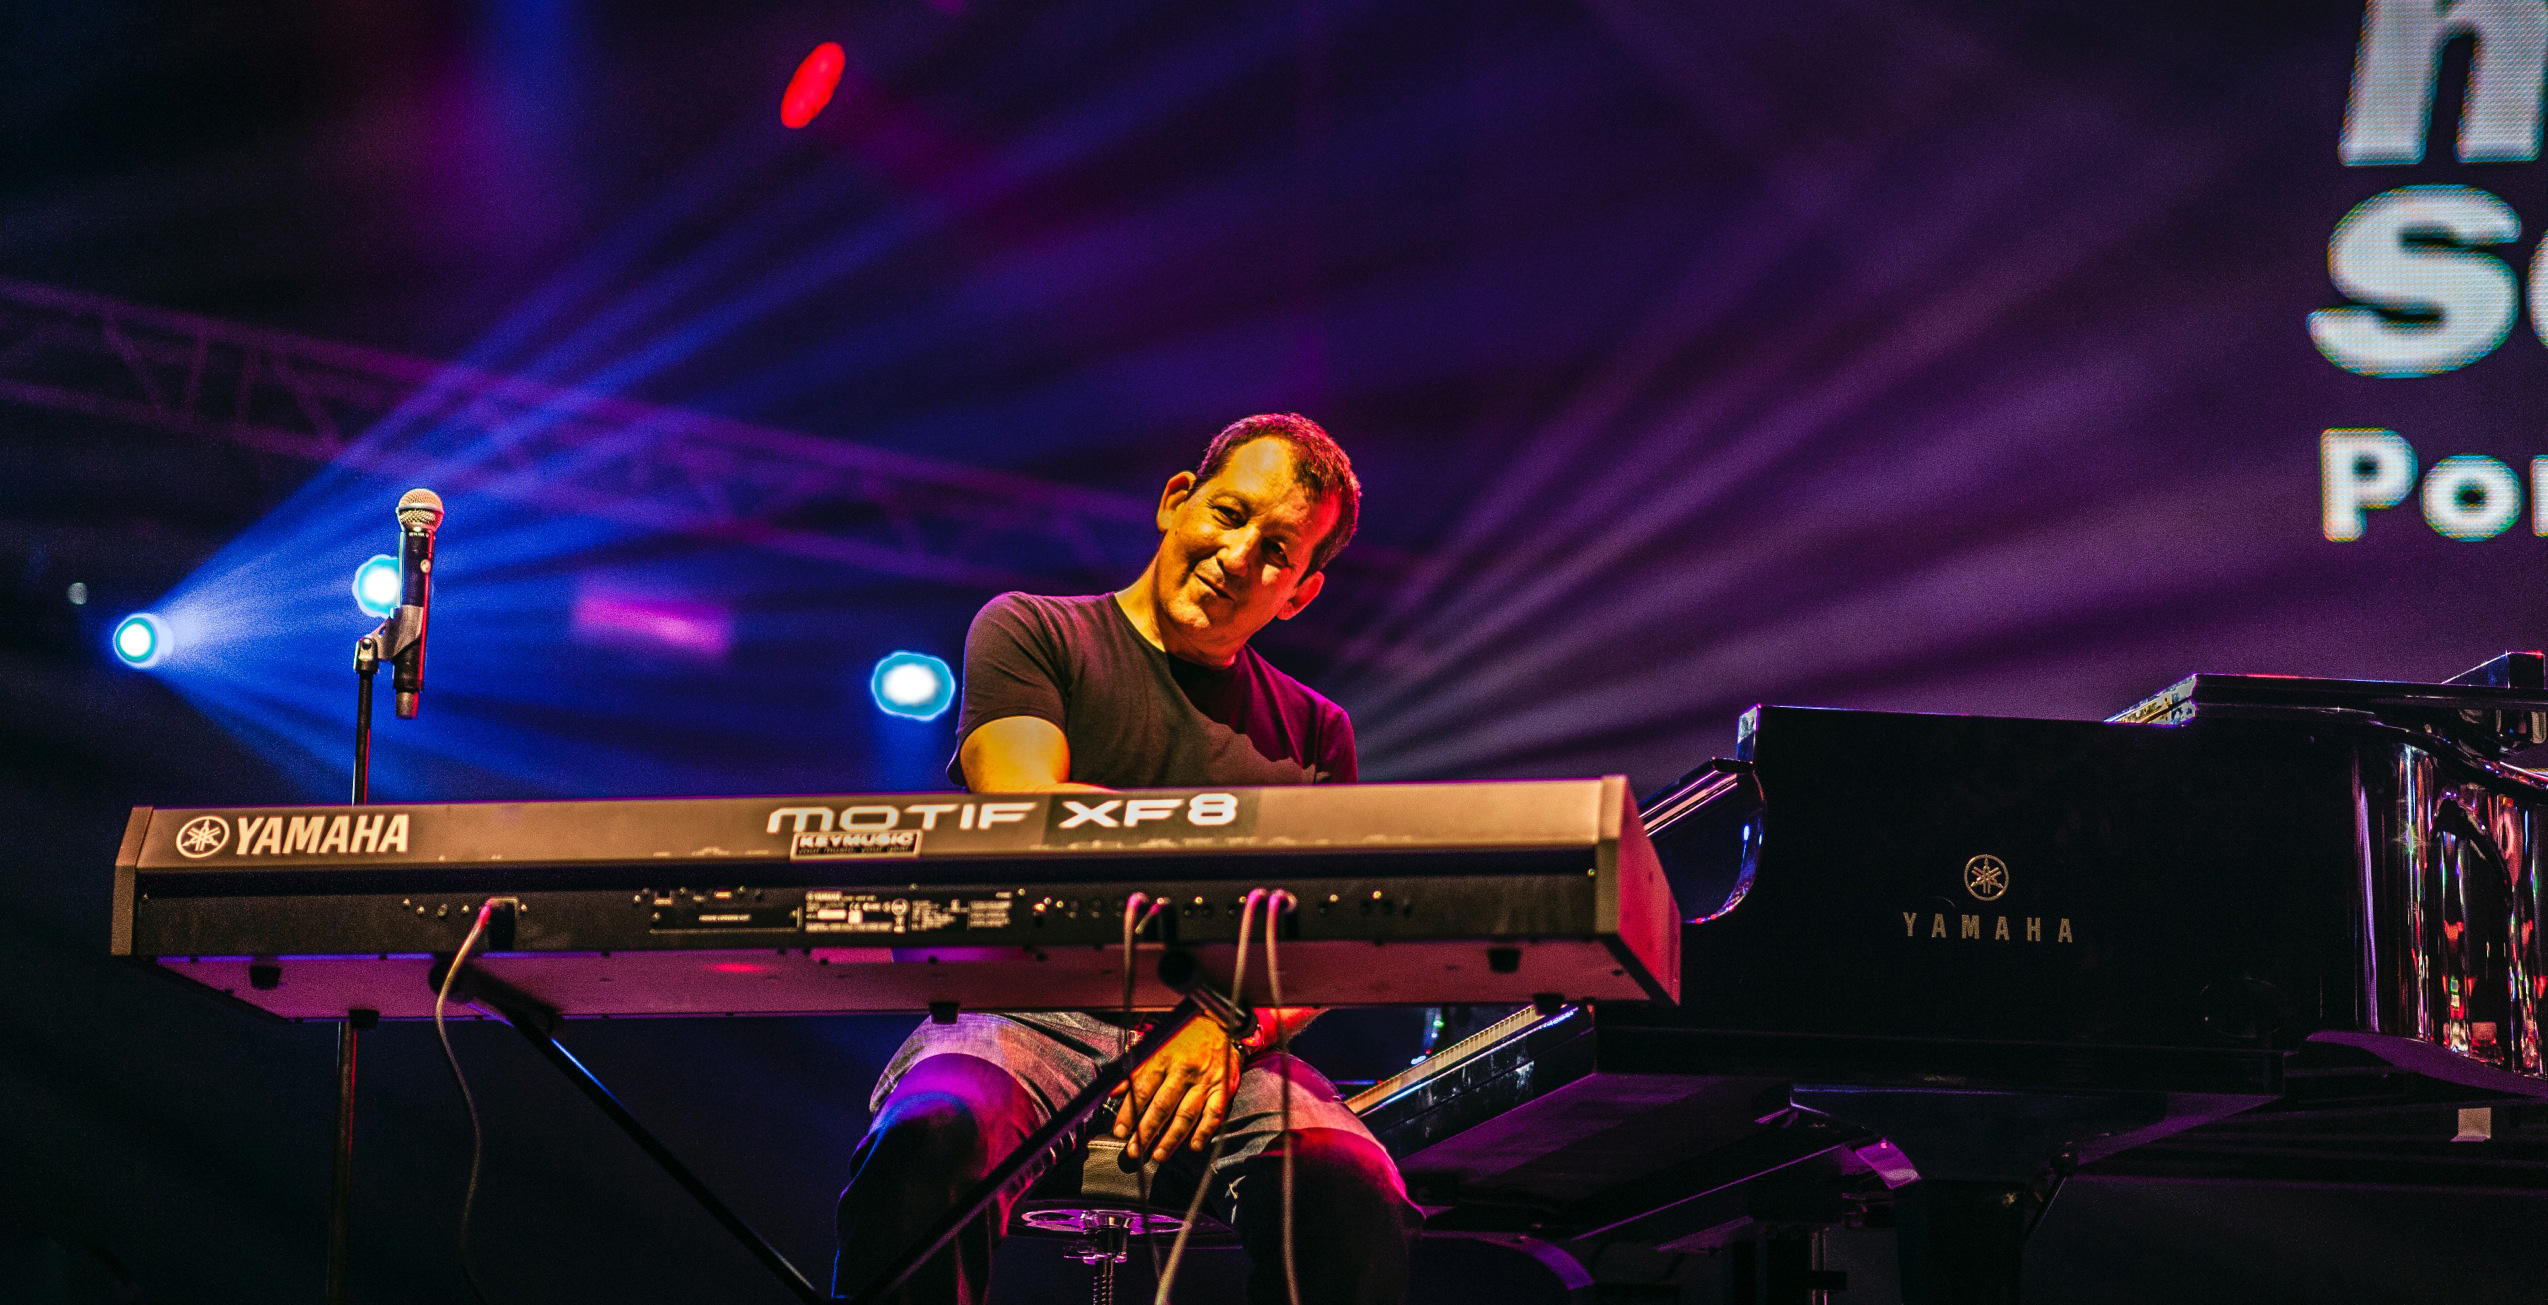 The Jeff Lorber Fusion Pics, Music Collection